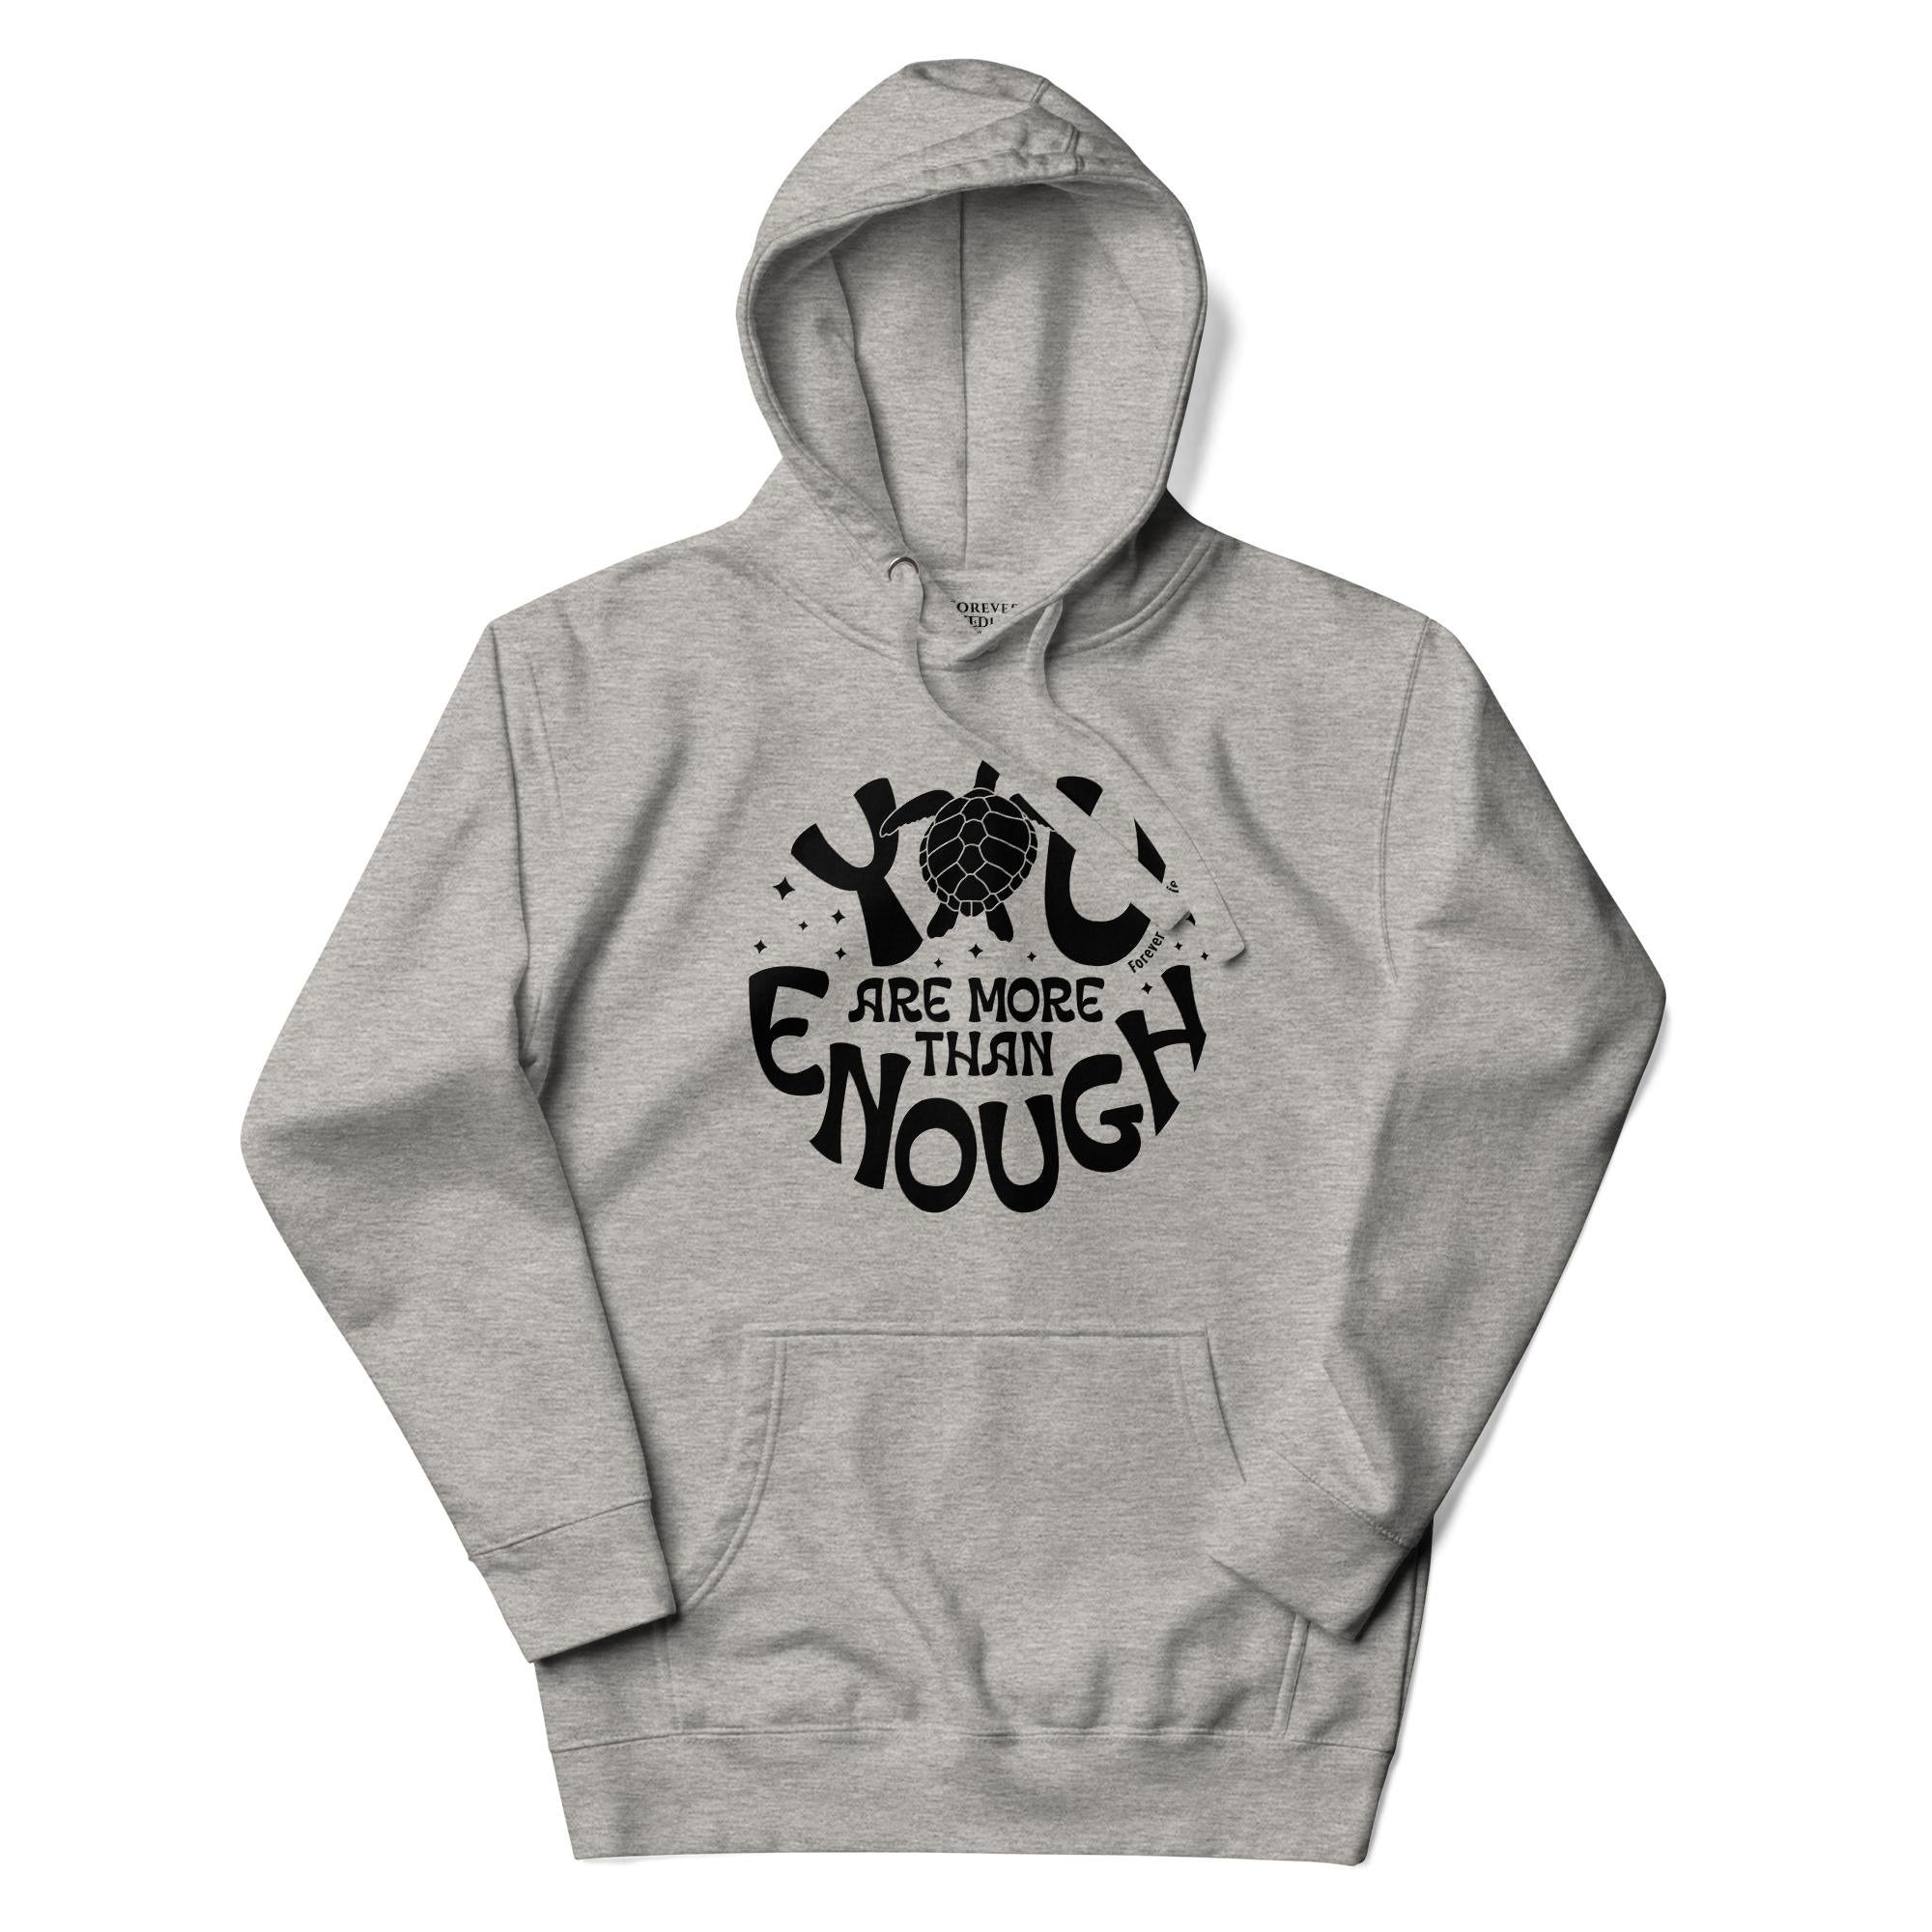 Sea Turtle Hoodie in Carbon Grey – Premium Wildlife Animal Inspirational Hoodie Design with YOu Are More Than Enough text, part of Wildlife Hoodies & Clothing from Forever Wildlife